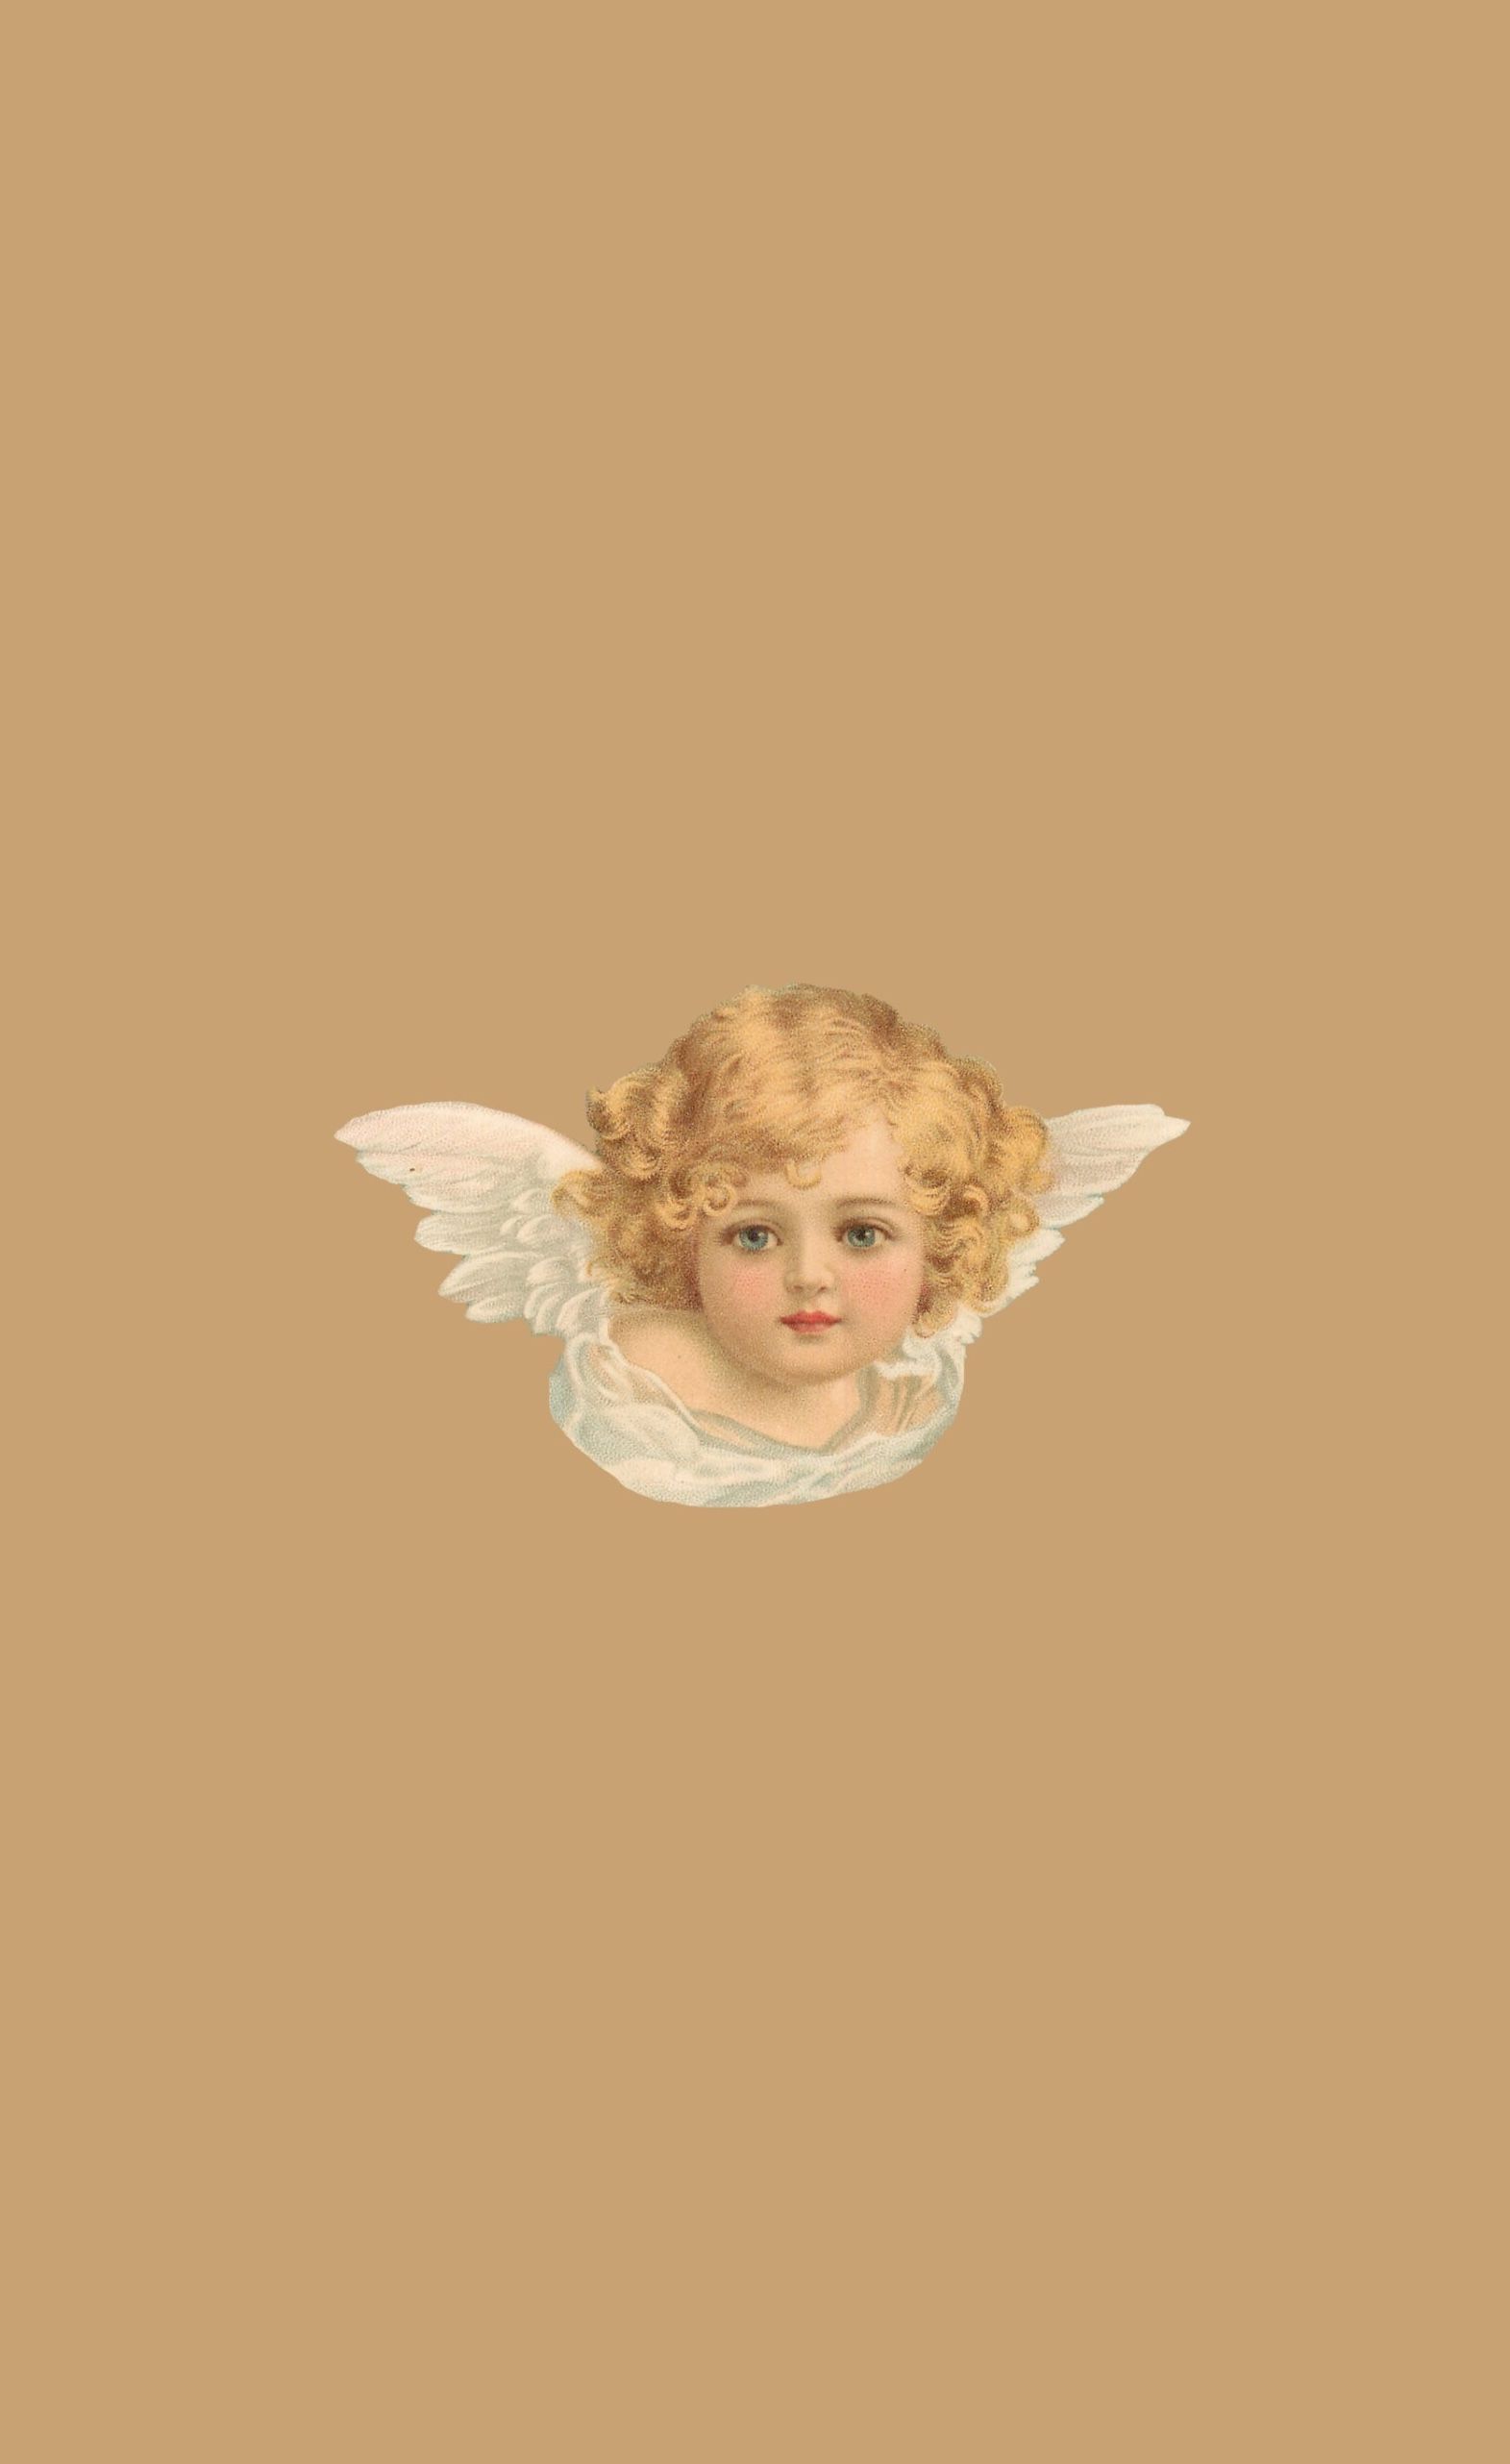 Cute baby angel illustration on a brown background - Angels, Cupid